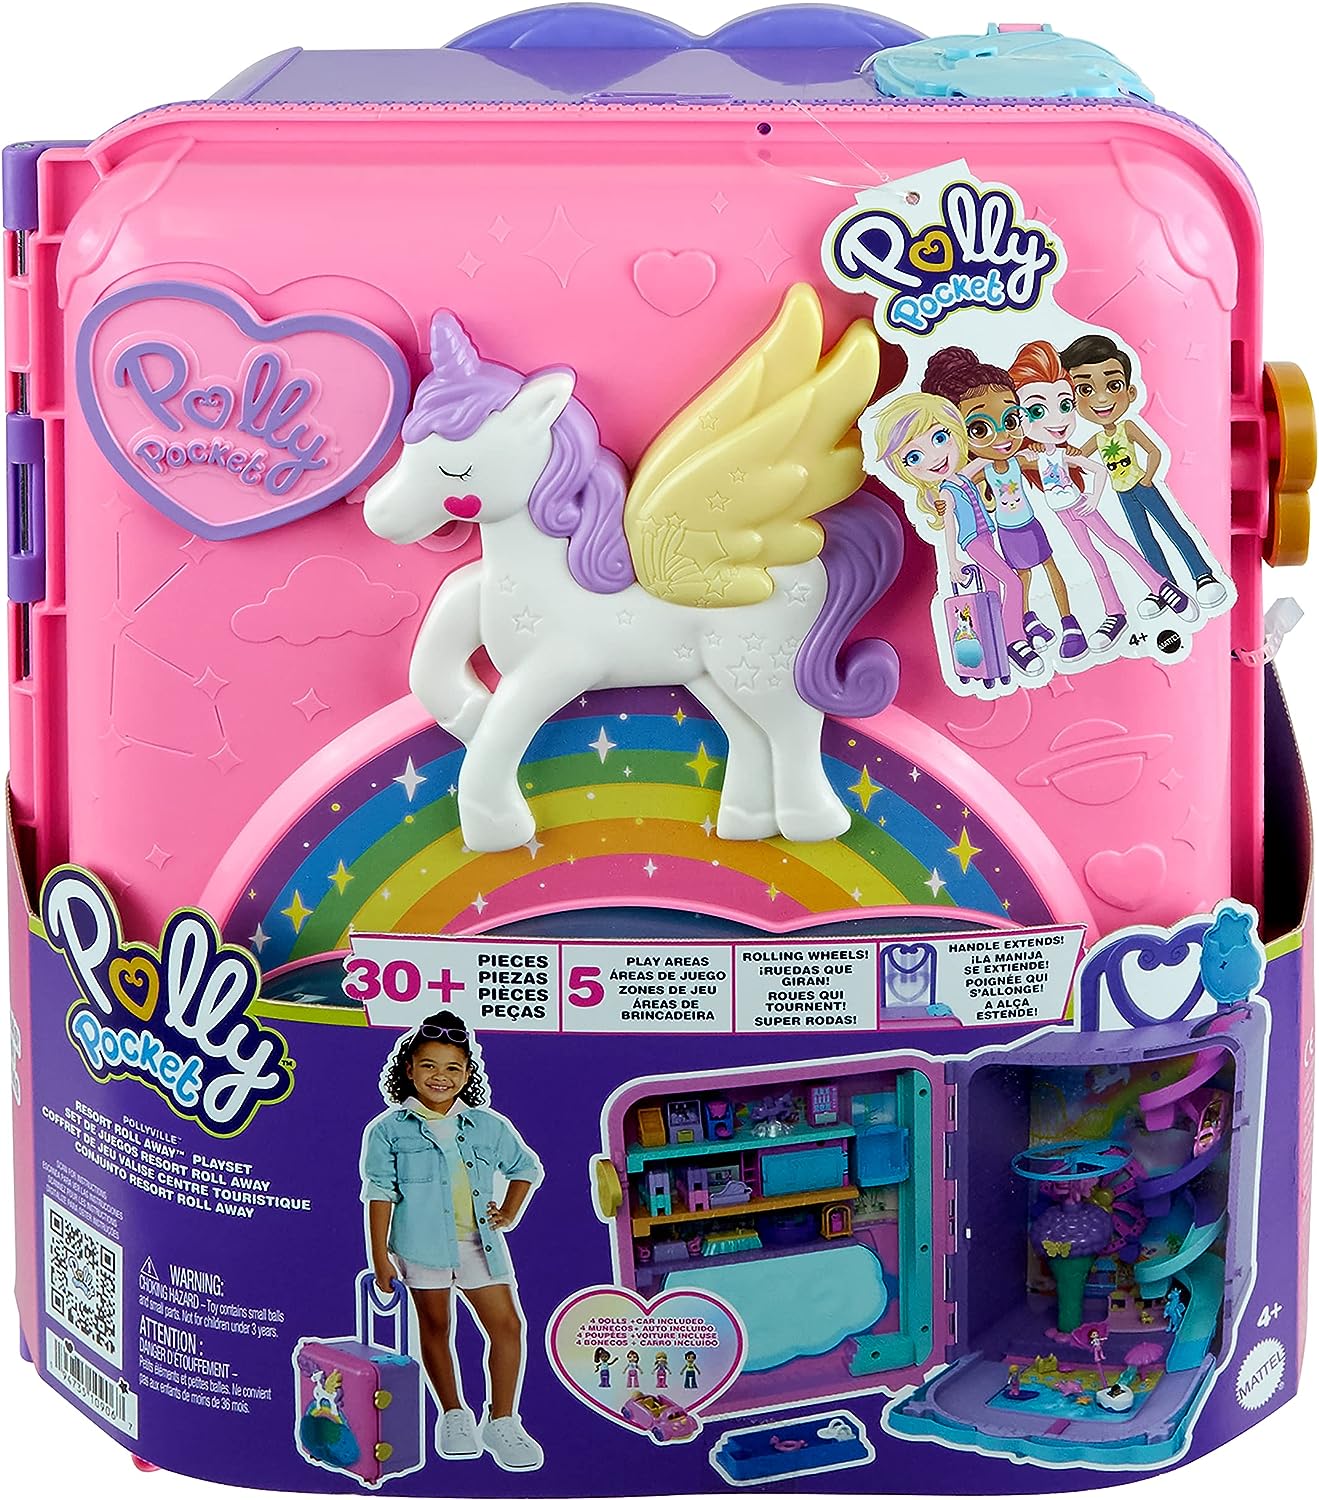 polly pocket dolls review